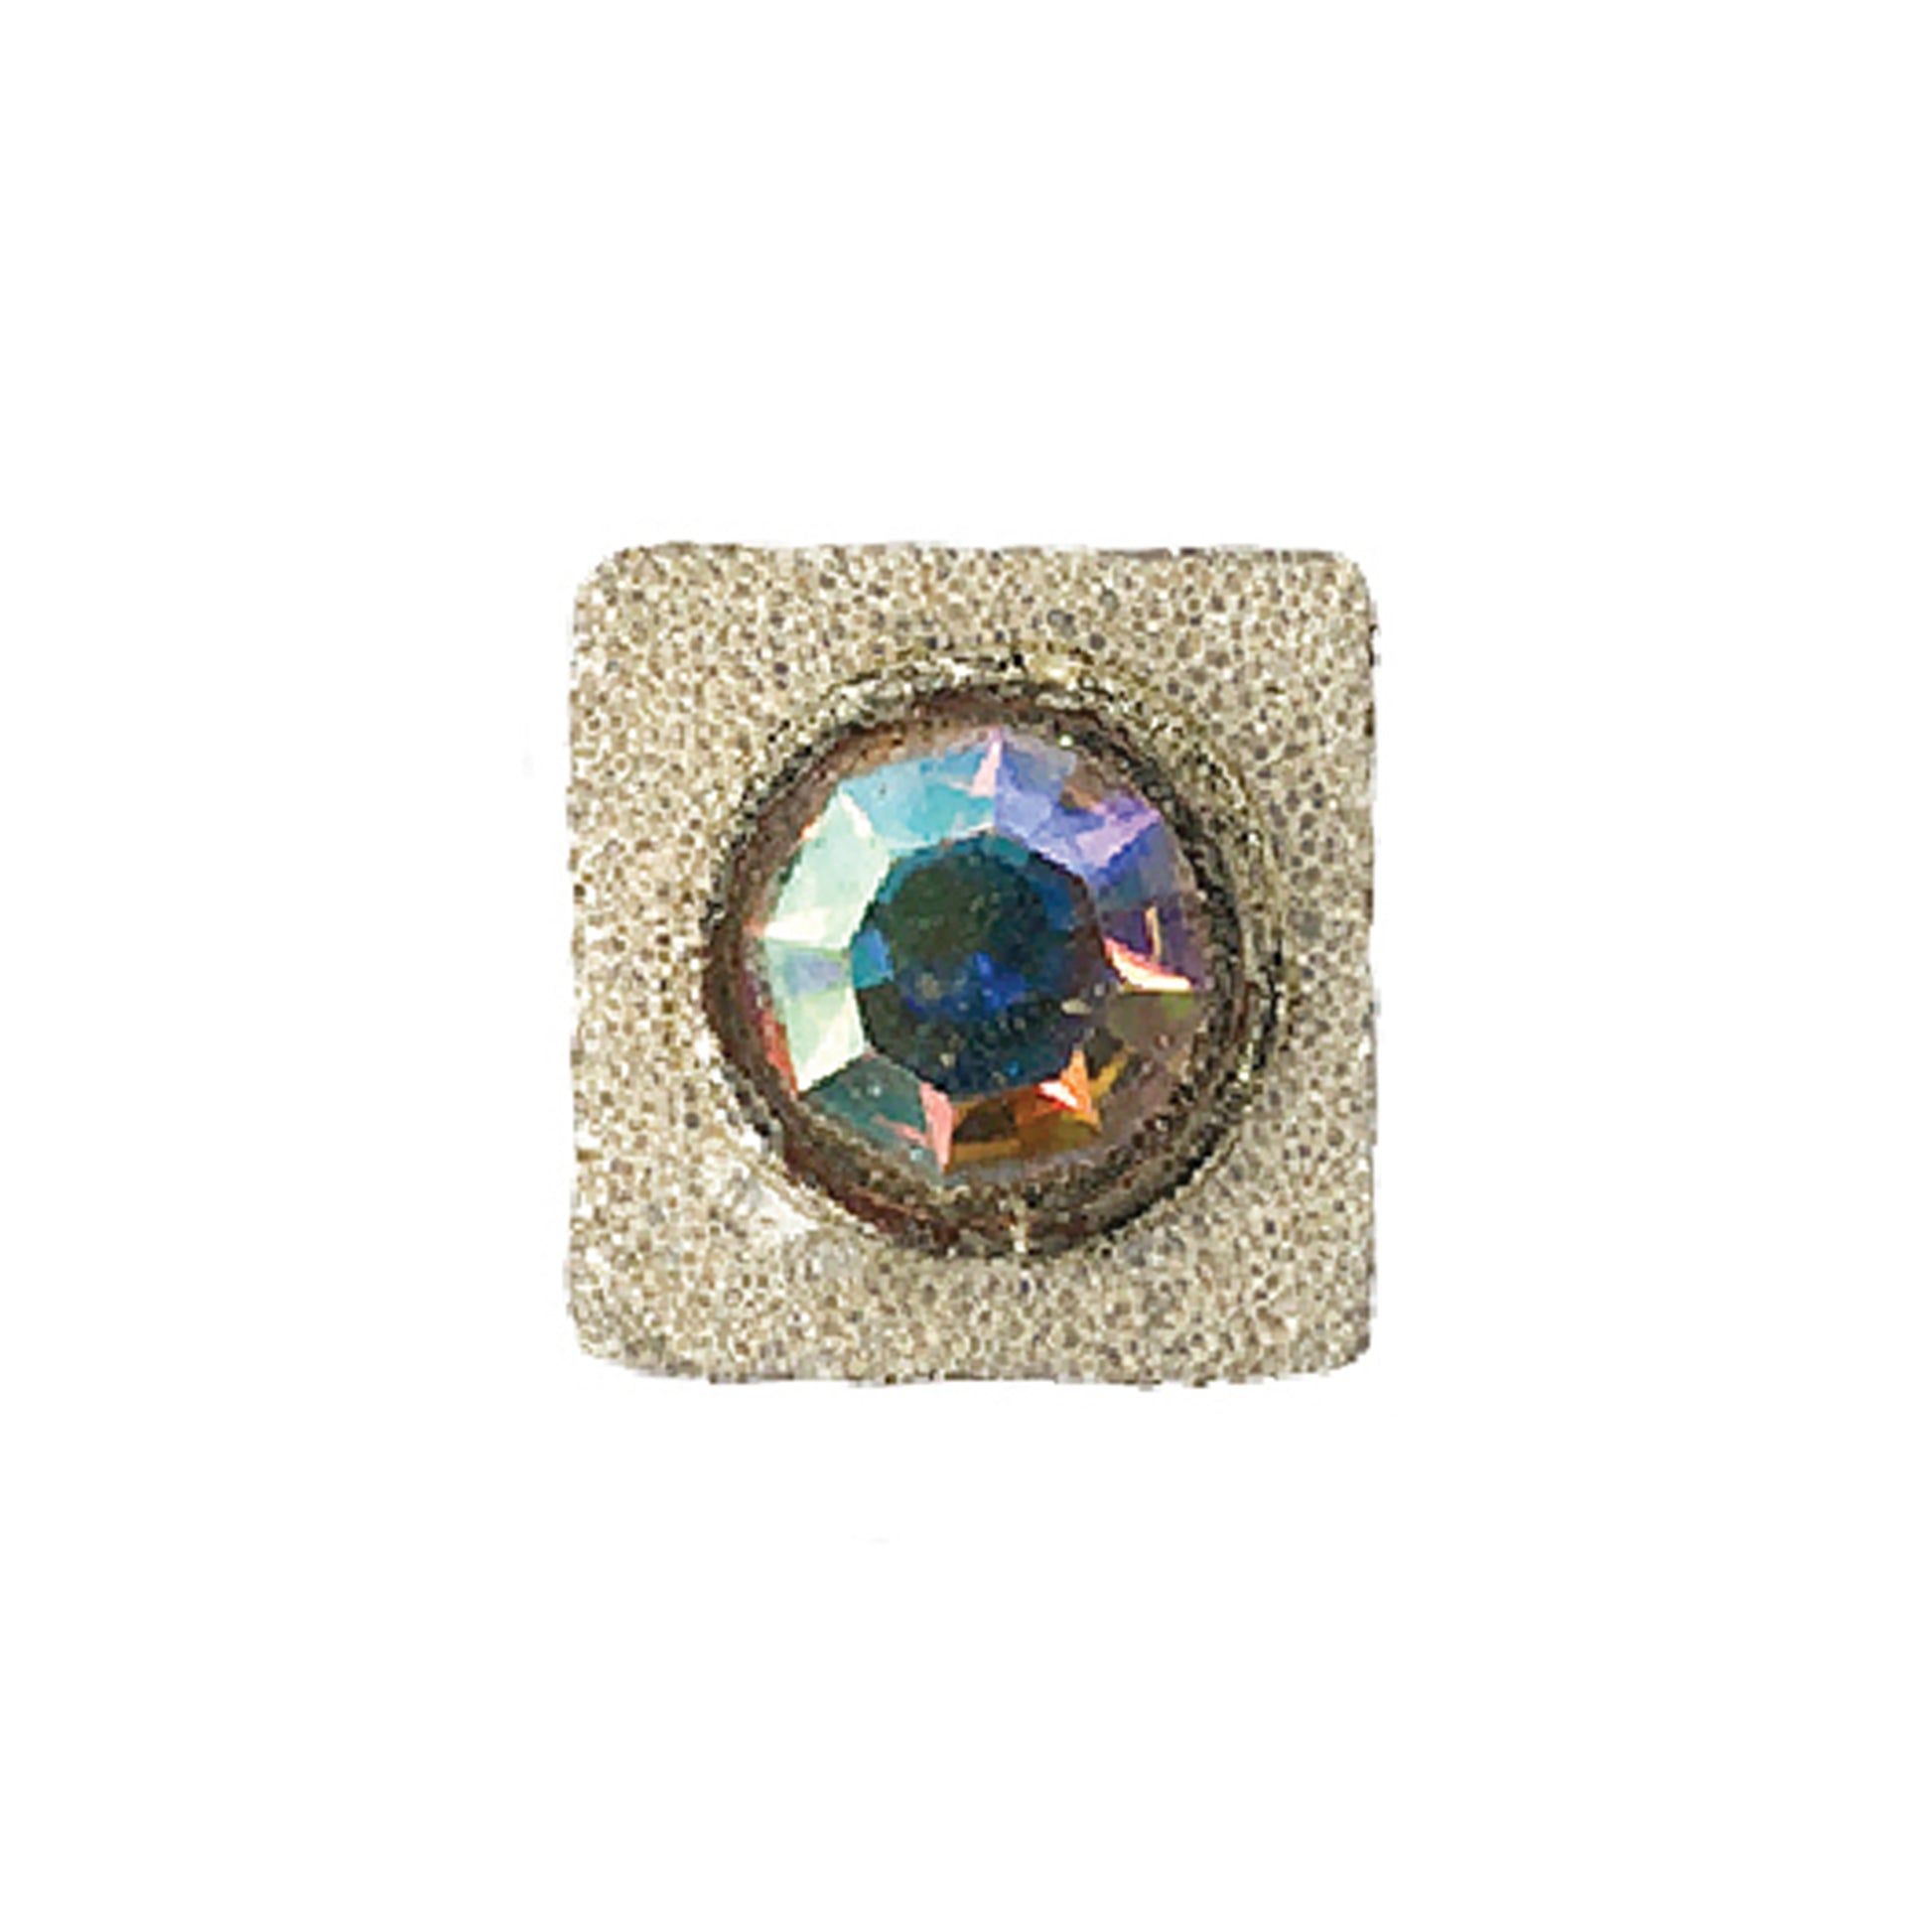 1/2" PZM concho with prism crystal (set of 4). 